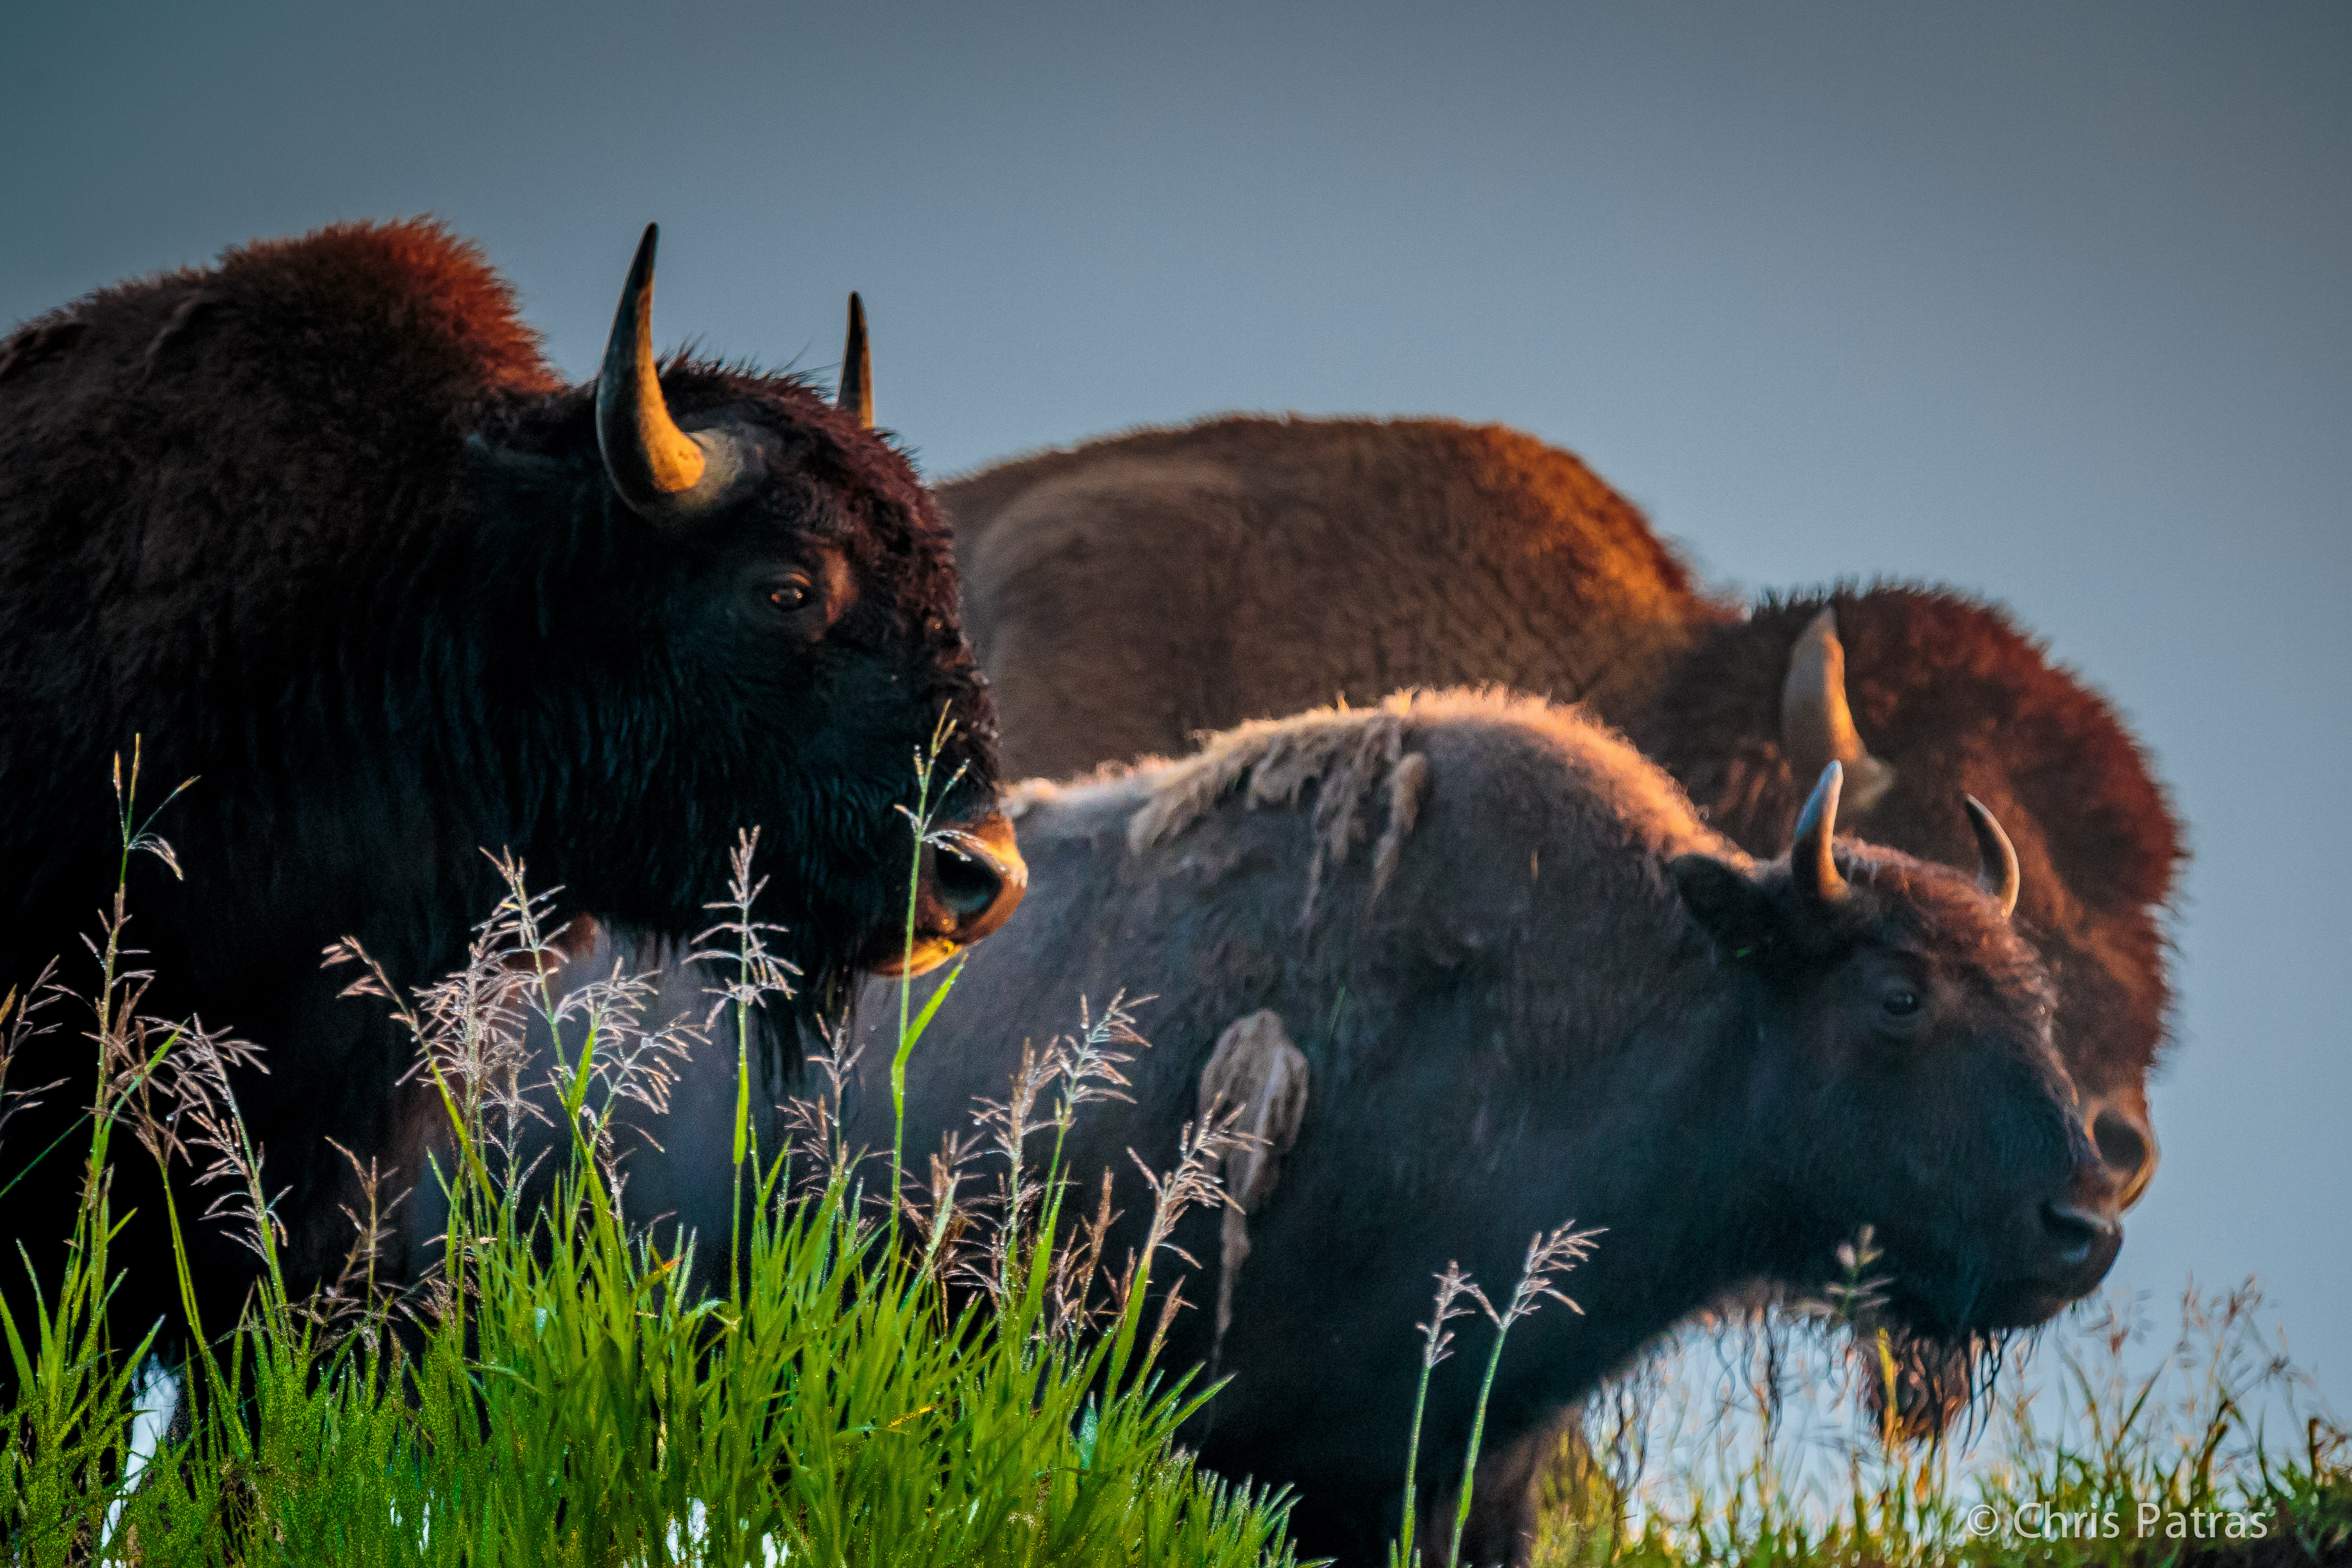 Sharp bison hooves help prairie grasses send roots 8 feet deep in the soil to the reach water in the Oglala aquifer.